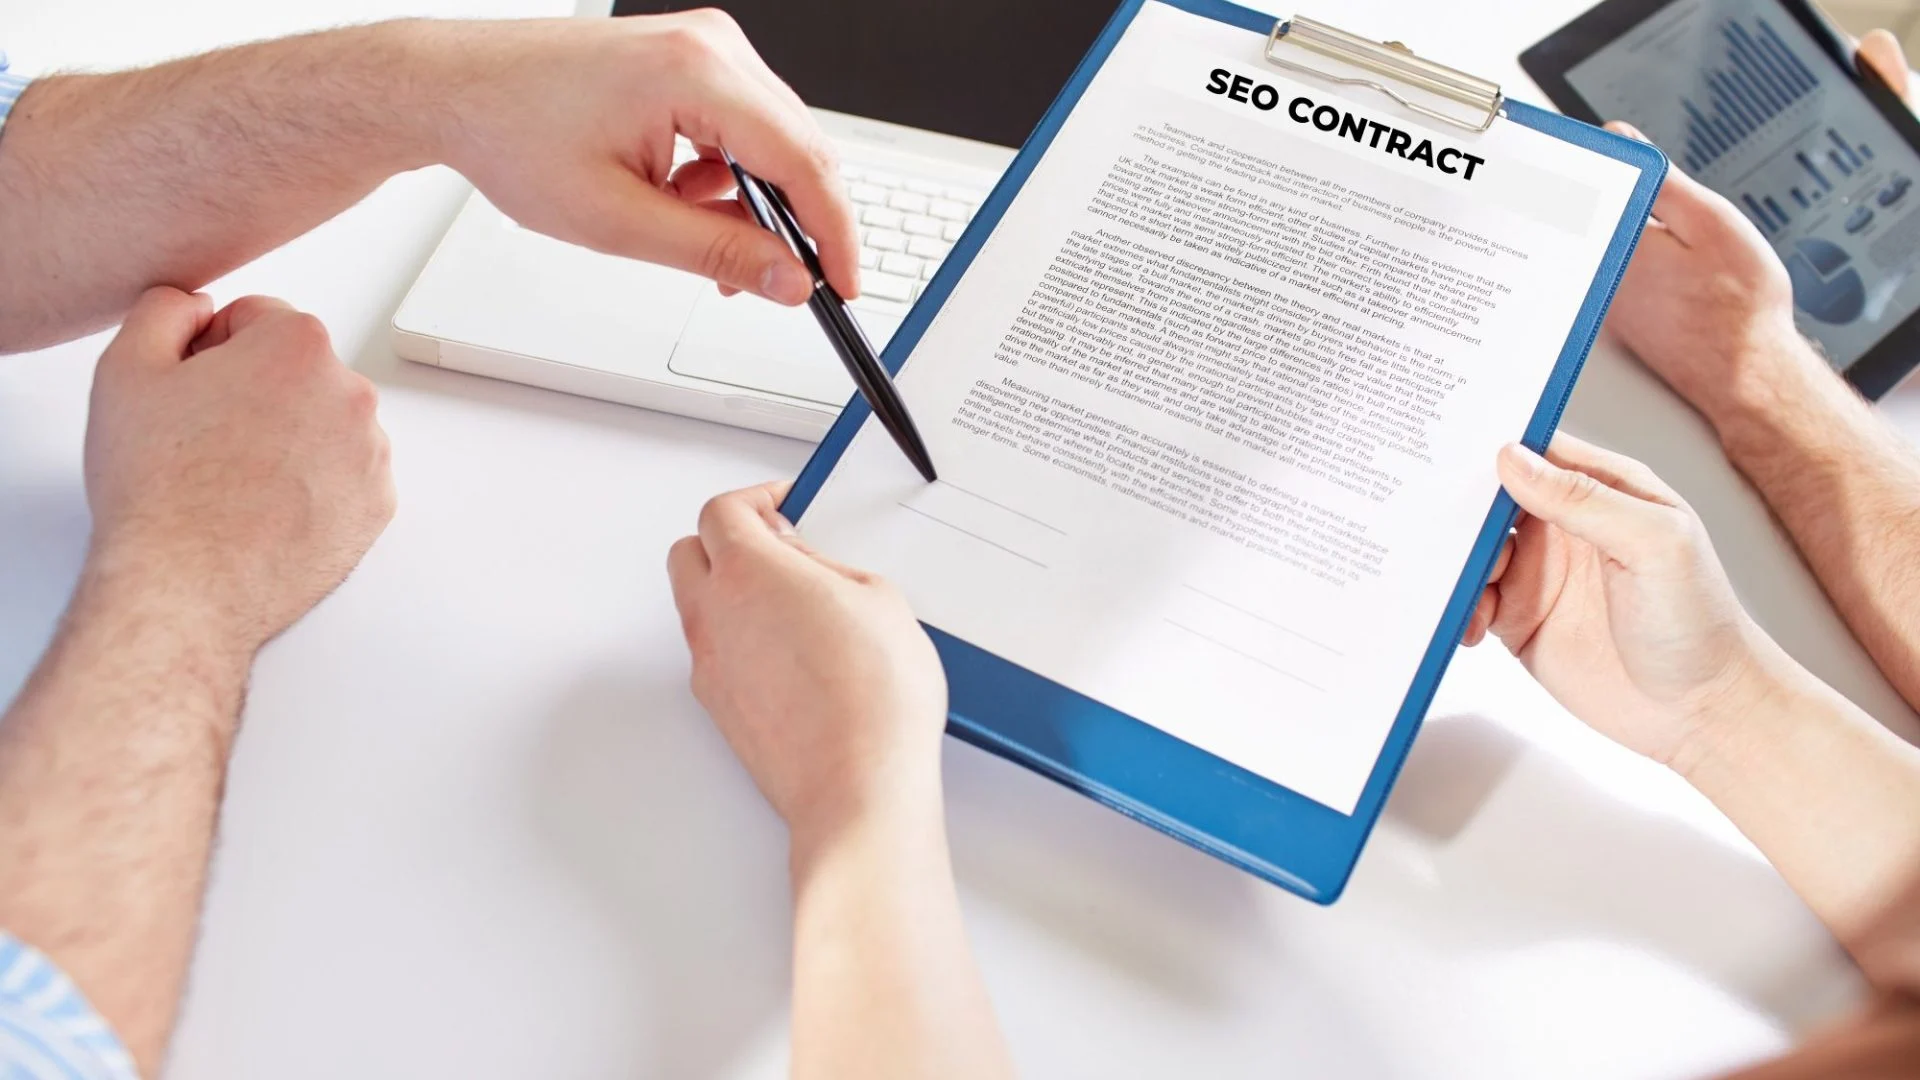 SEO contract clarity guidelines